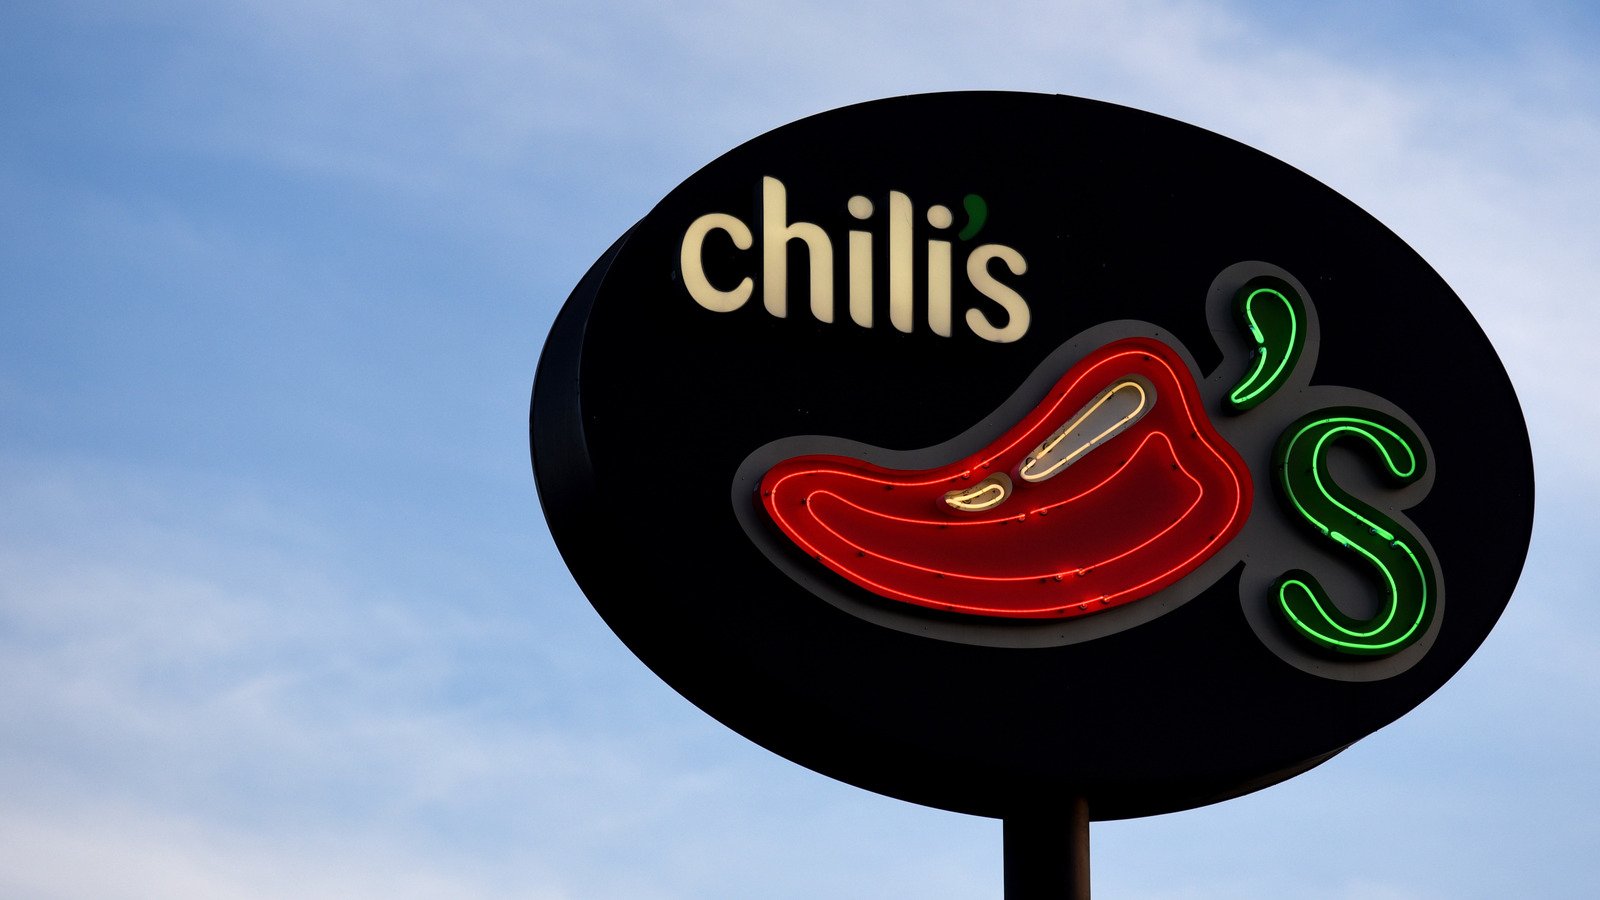 Popular Chili's Menu Items, Ranked Worst To Best